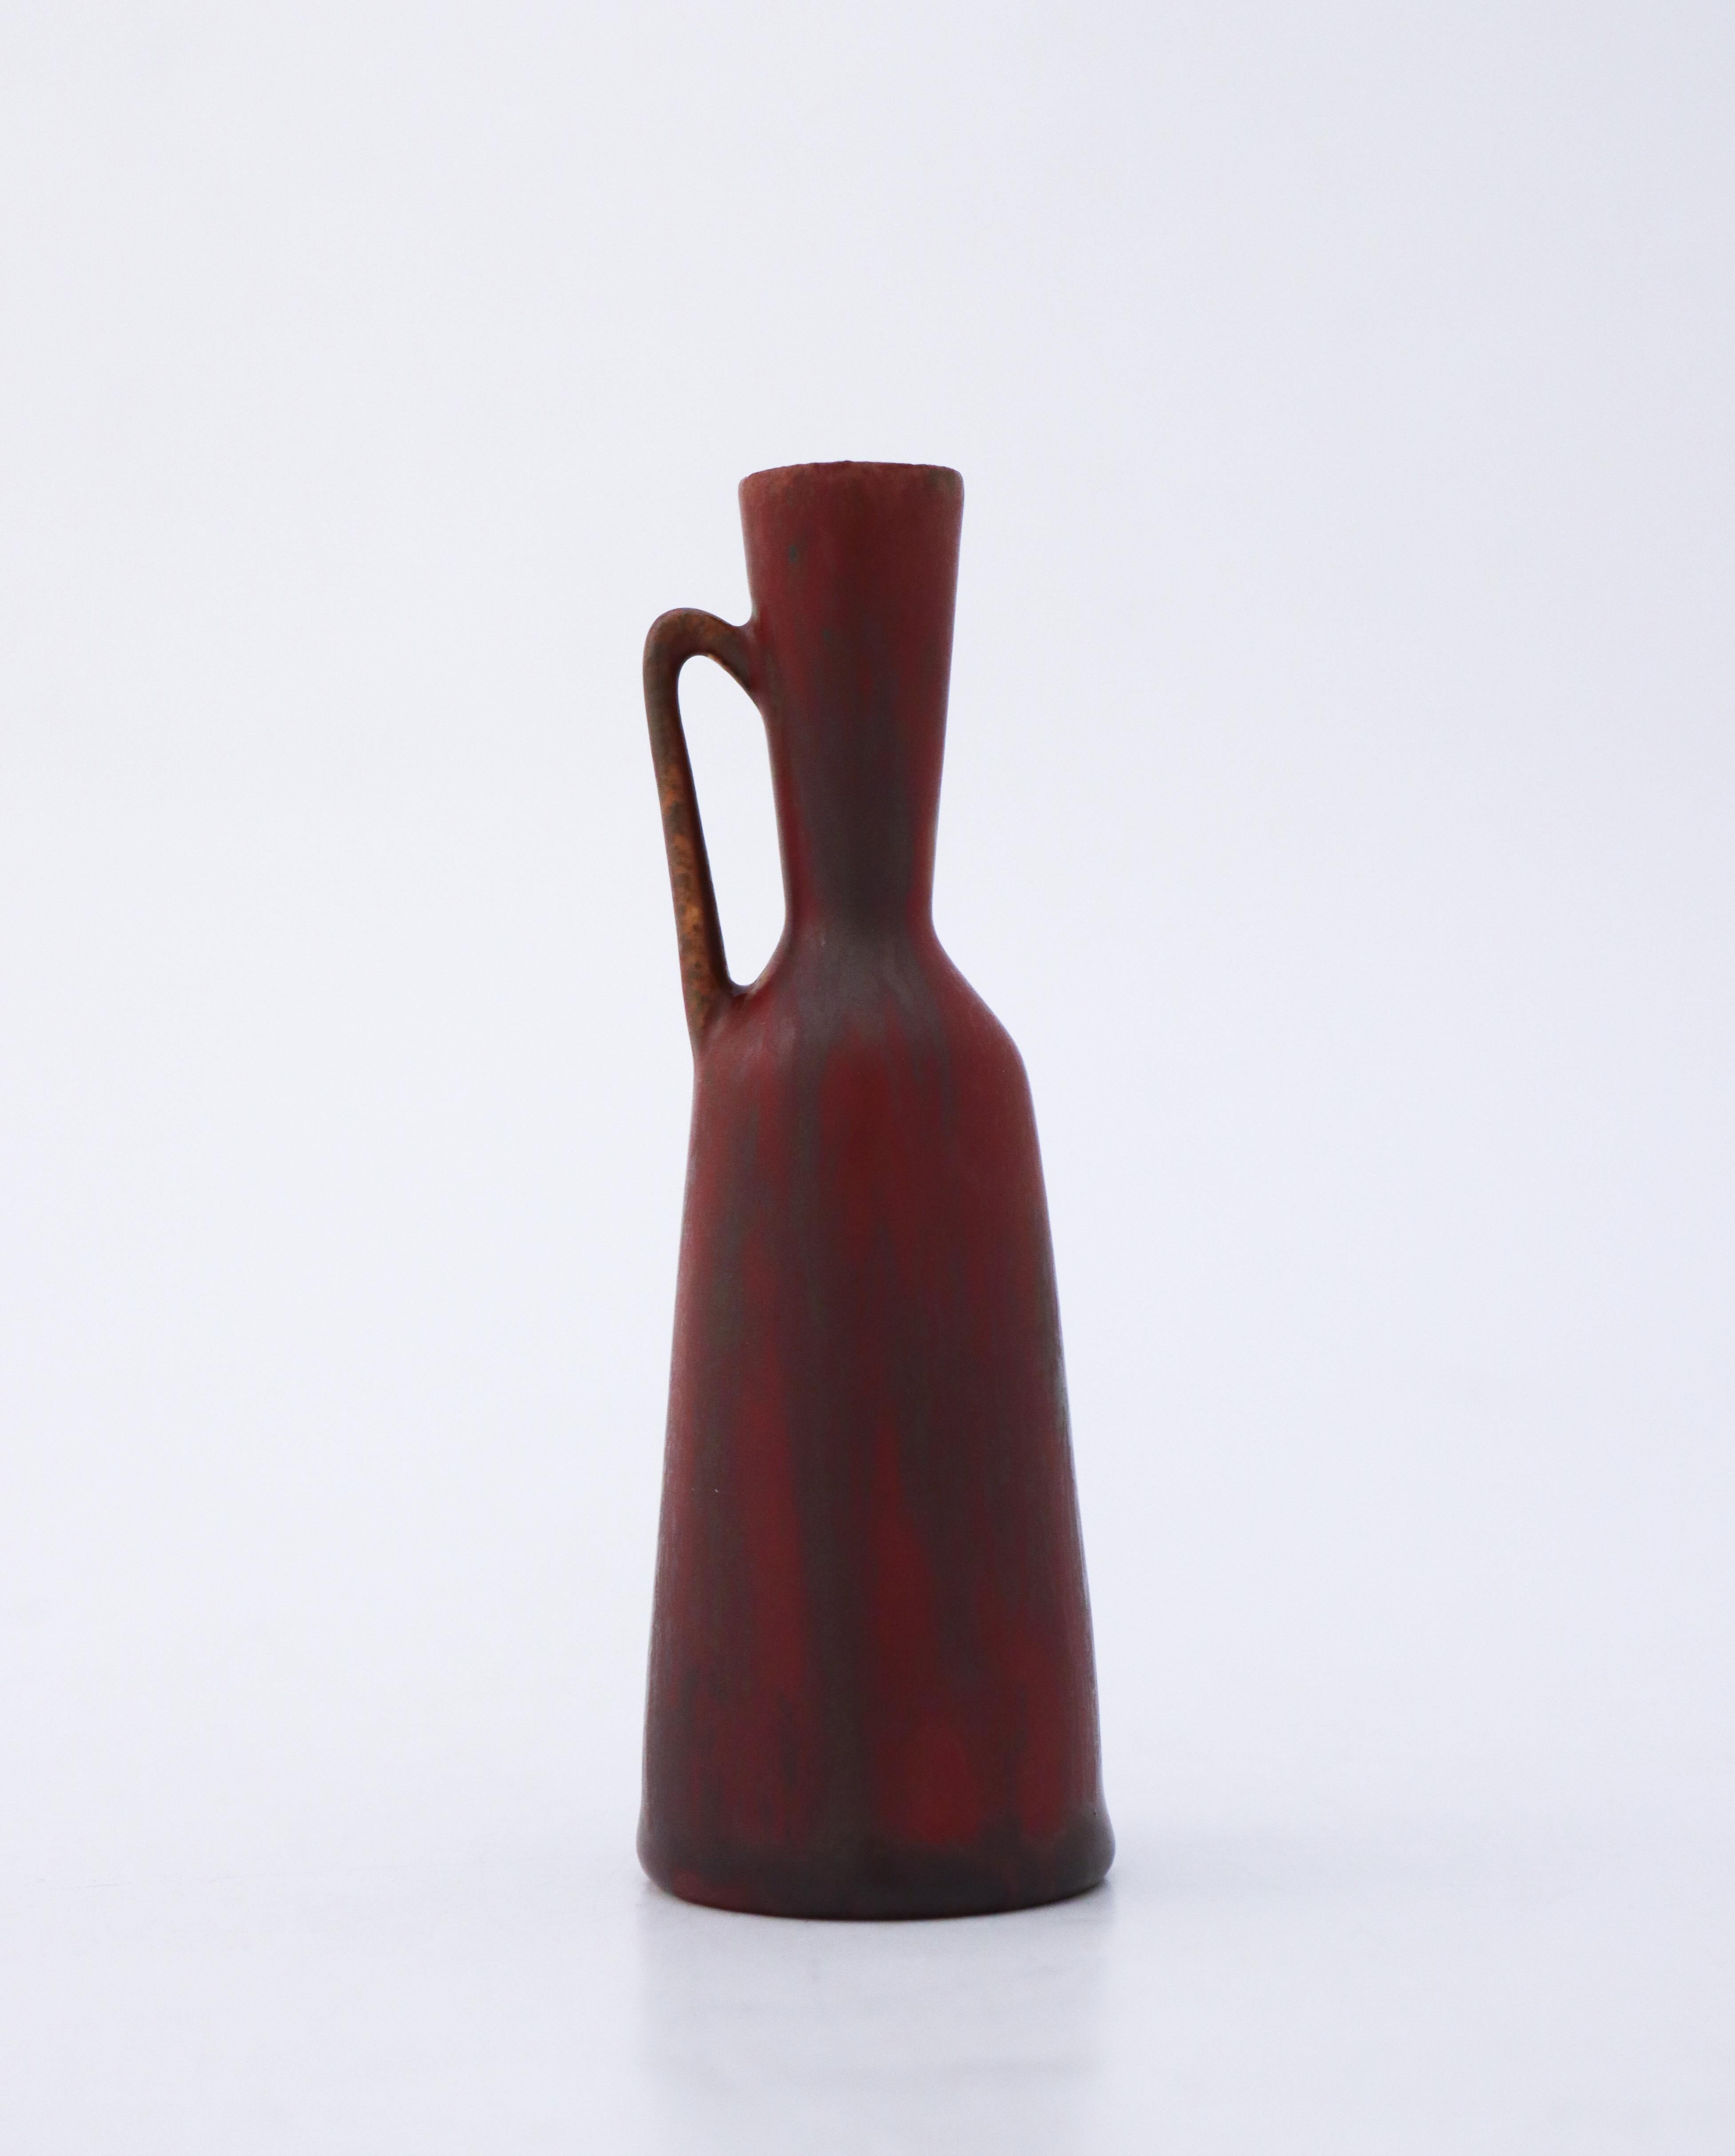 A brown / Bordeaux red vase designed by Carl-Harry Stålhane at Rörstrand, it´s 12.5 cm (5